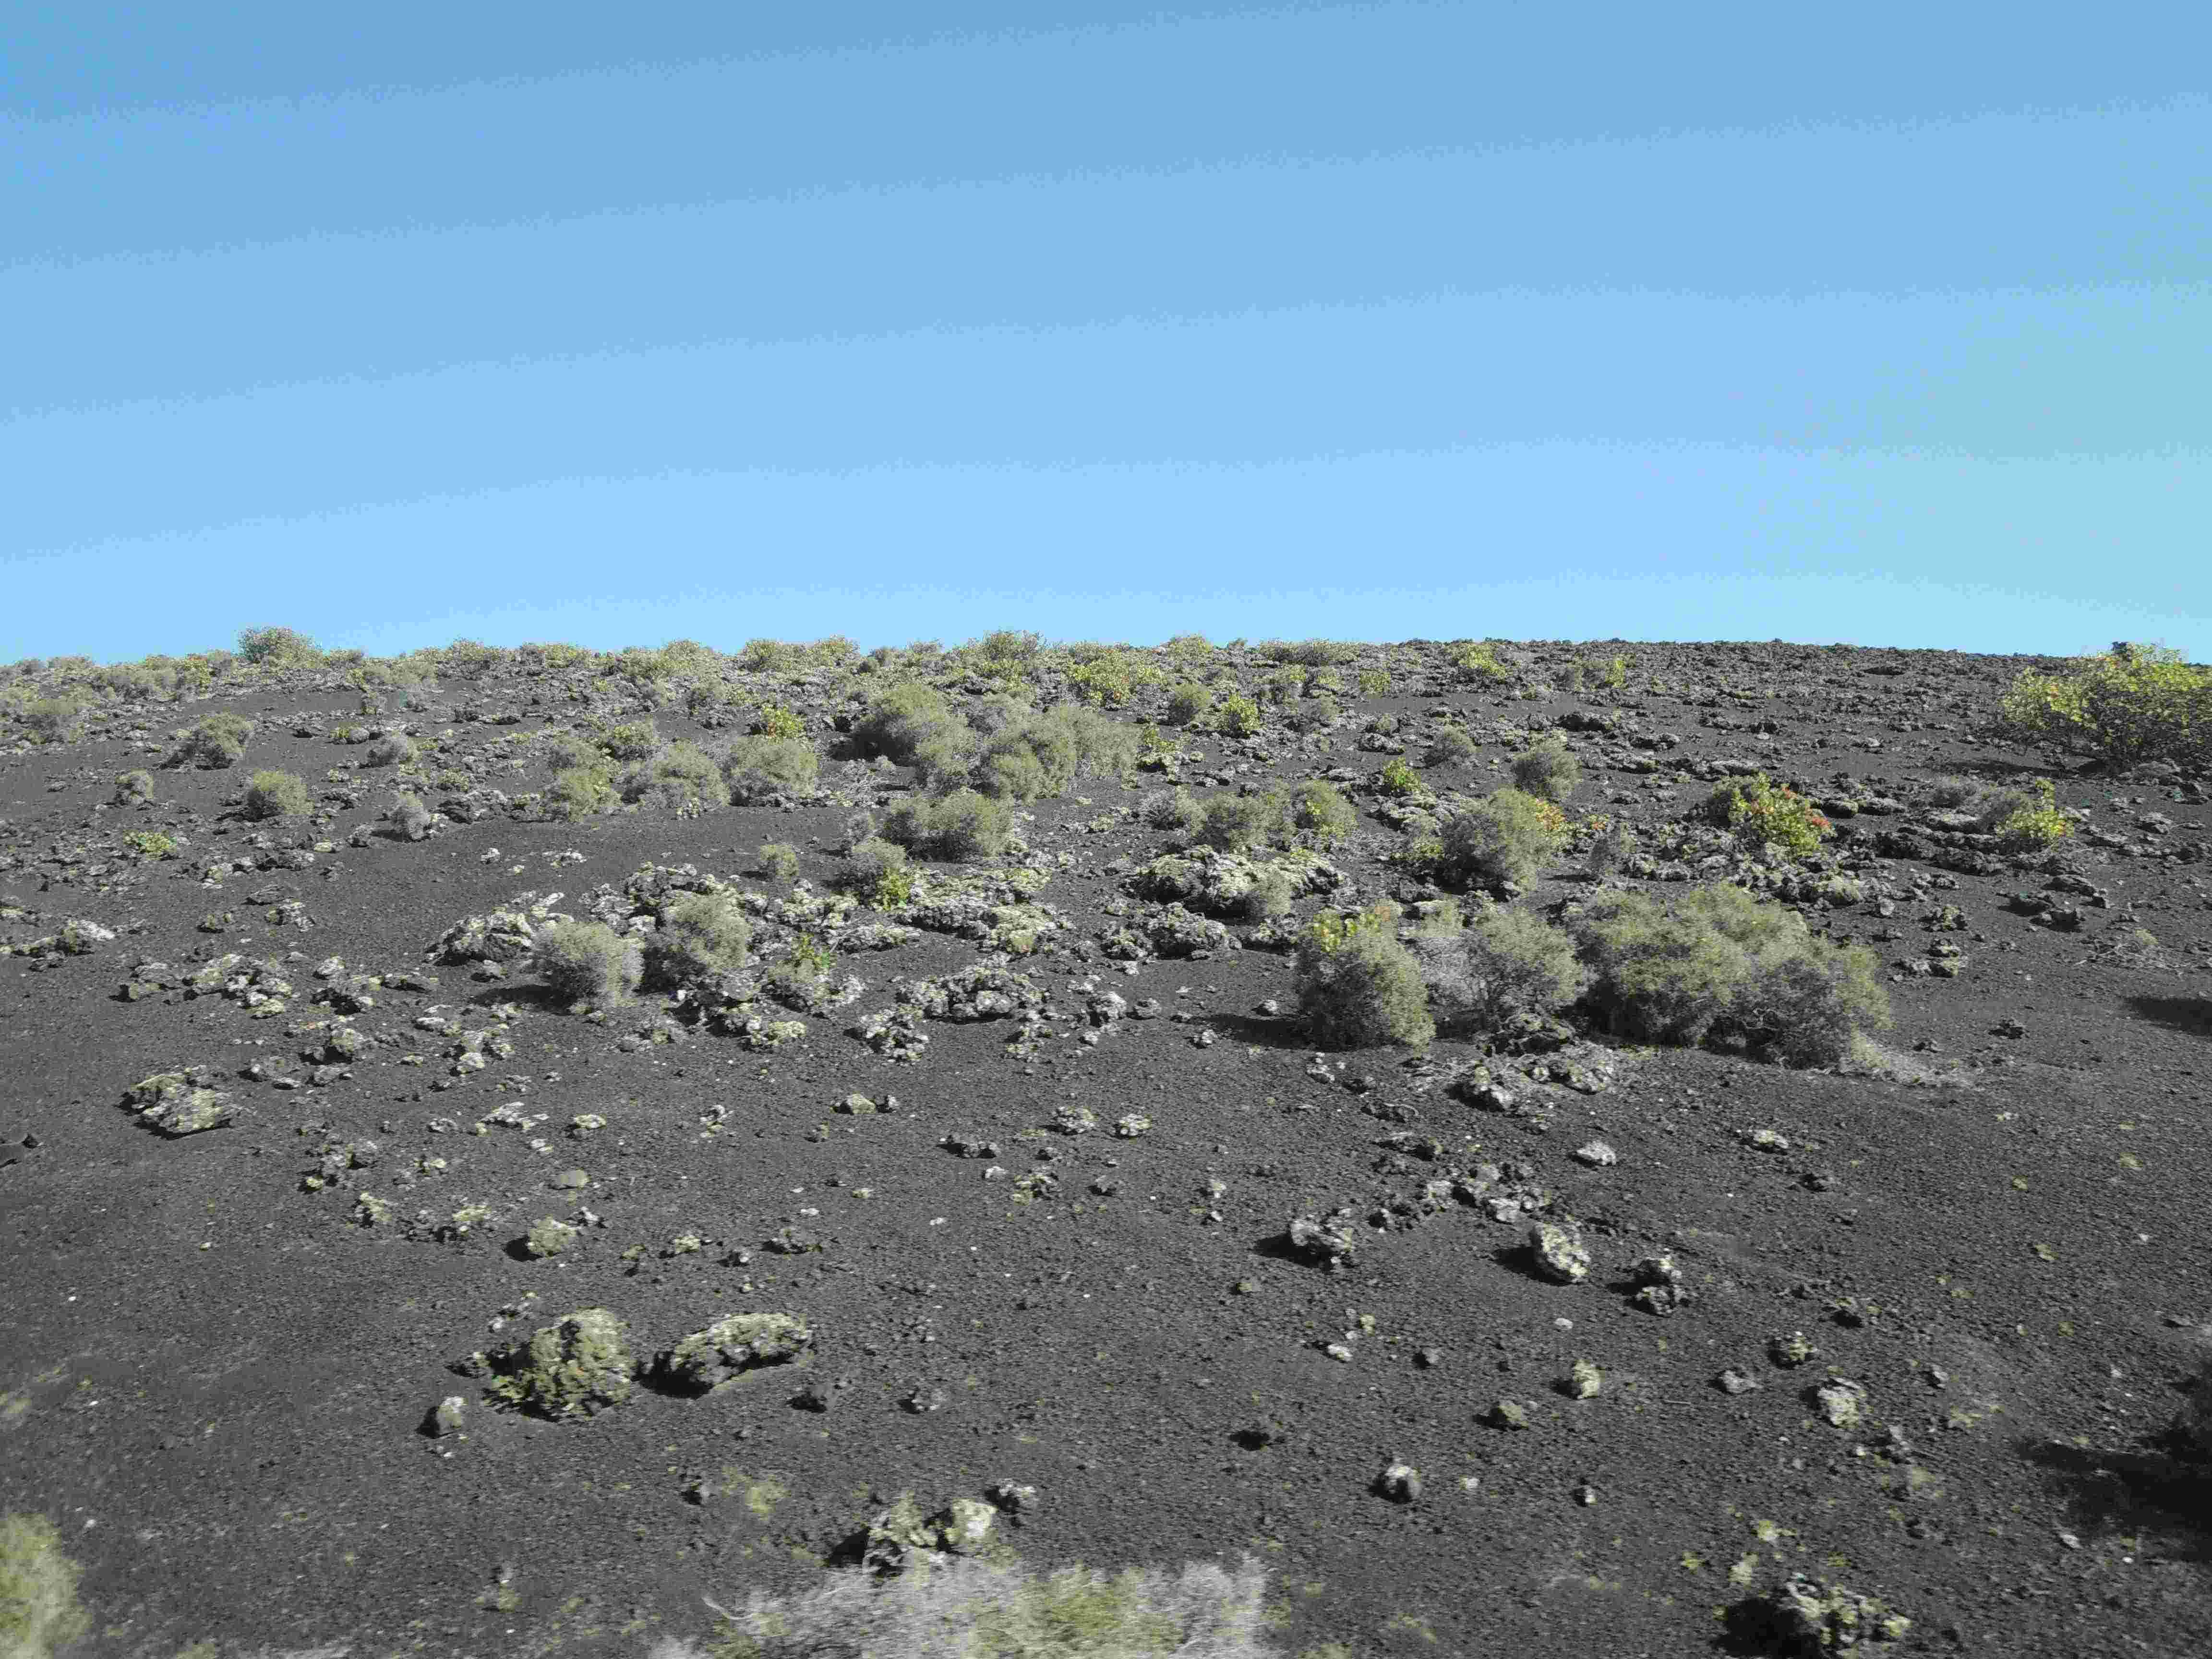 A desert with lots of lava rock, ash and sagebrush